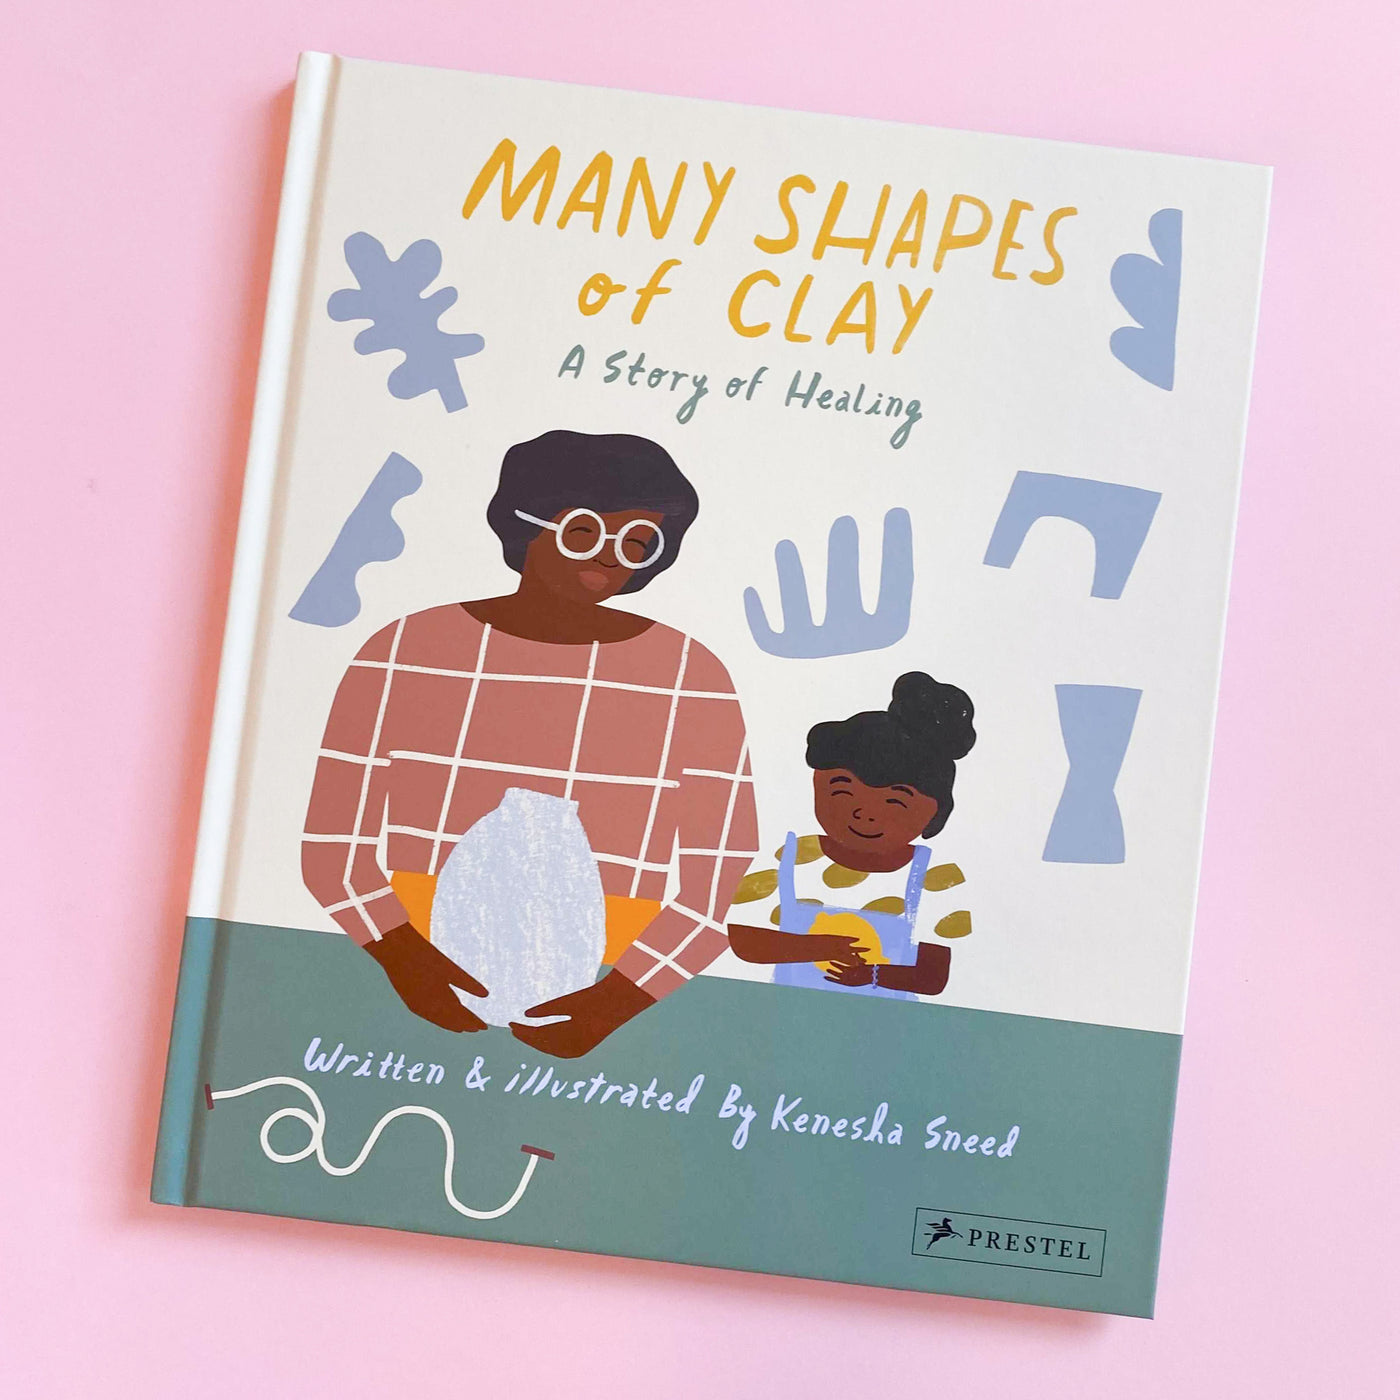 Many Shapes of Clay: A Story of Healing by Kenesha Sneed